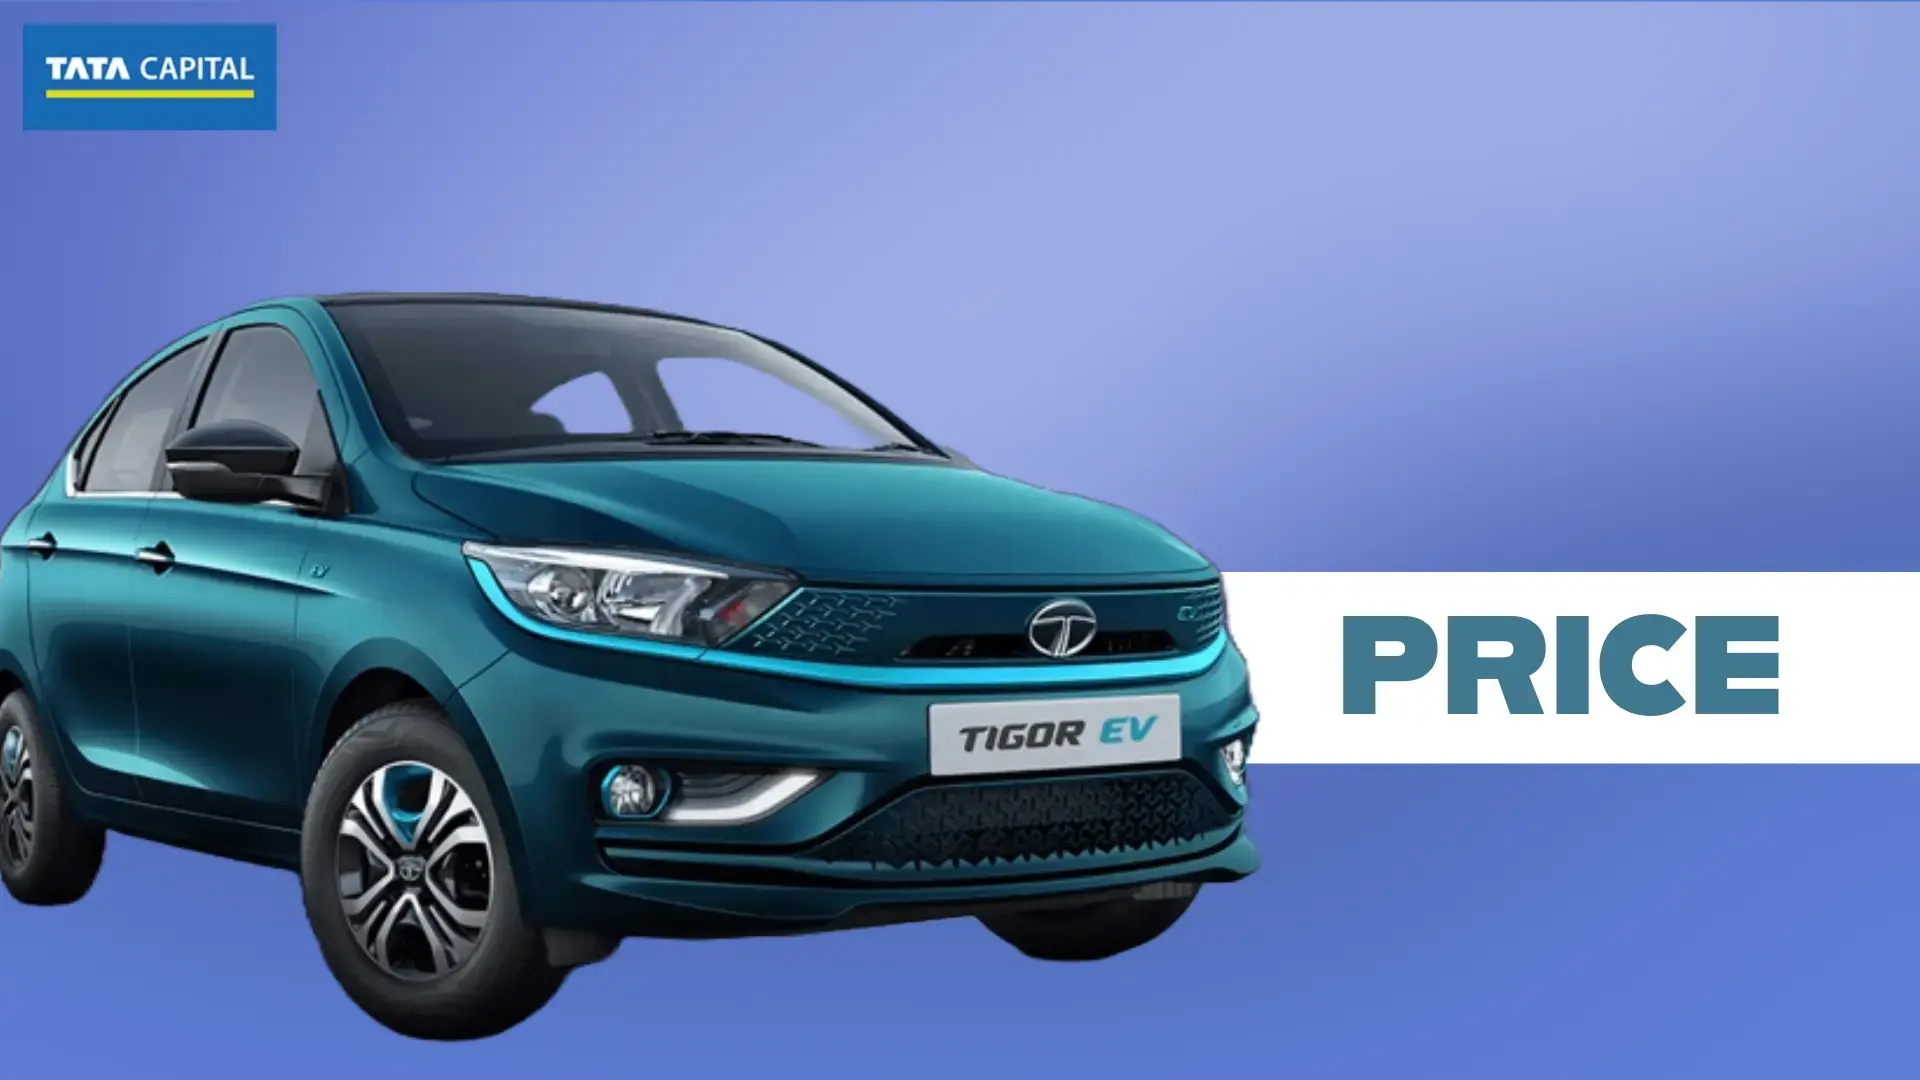 Understanding the Factors Affecting the Price of the Tata Tigor EV